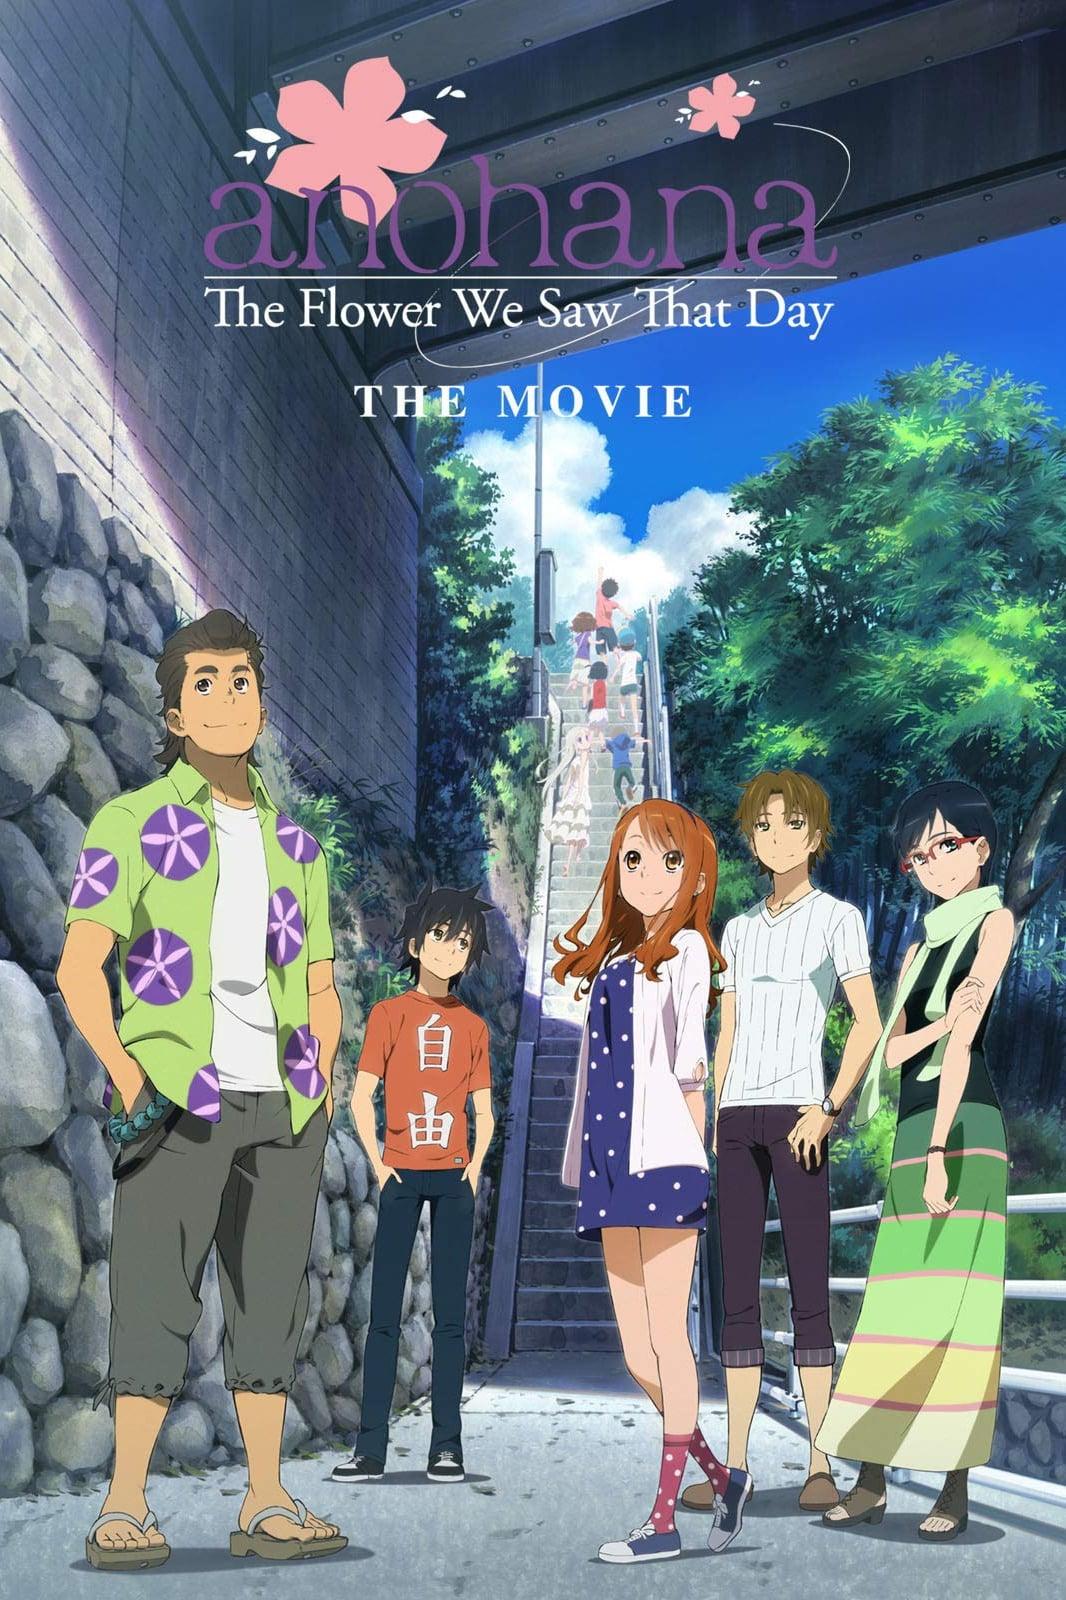 anohana: The Flower We Saw That Day - The Movie poster